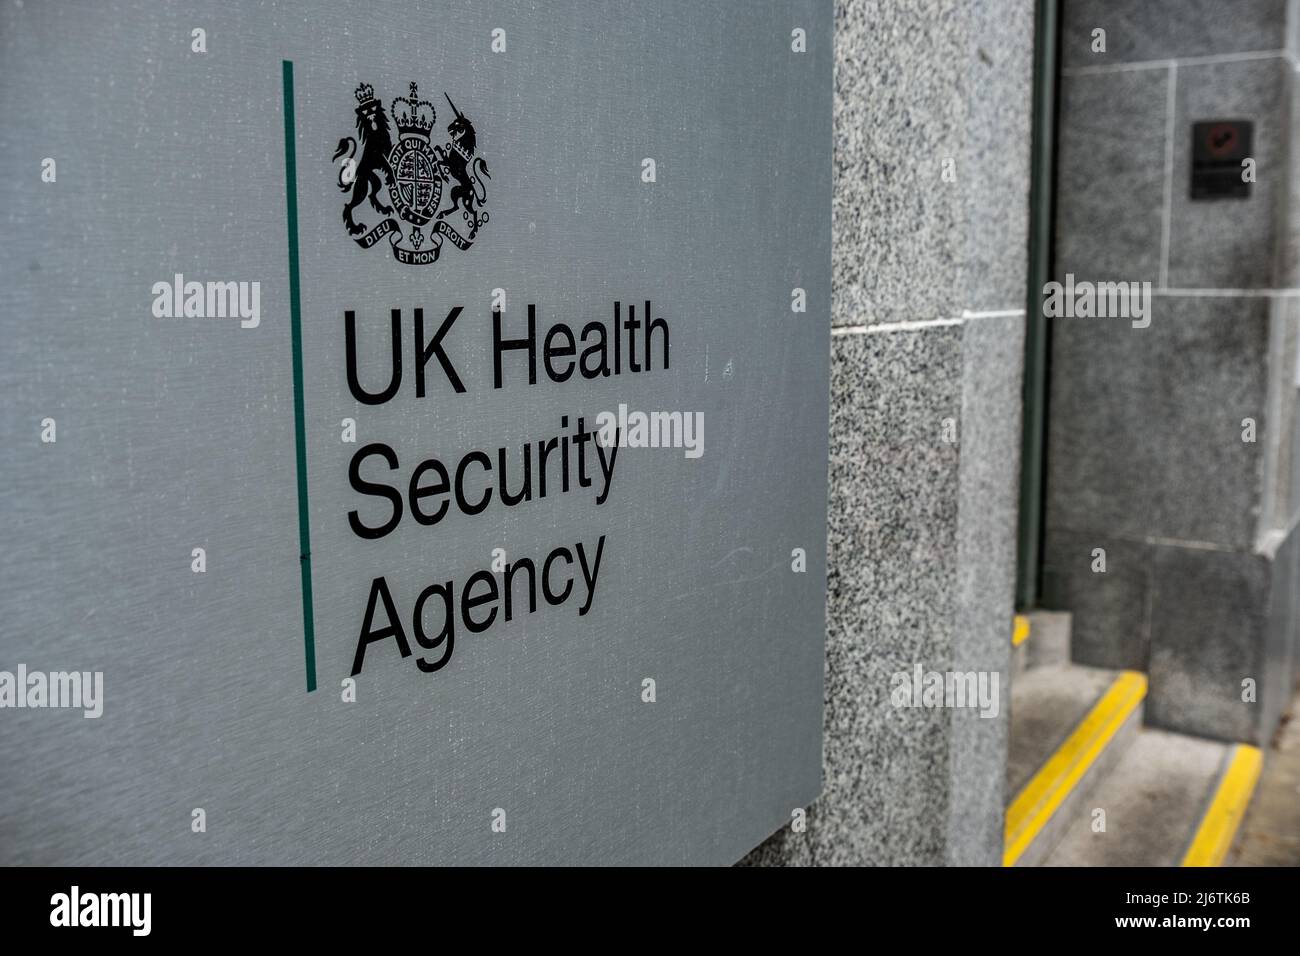 London- May, 2022: UK Health Security Agency, a UK government agency responsible for public health security and infectious disease capability Stock Photo